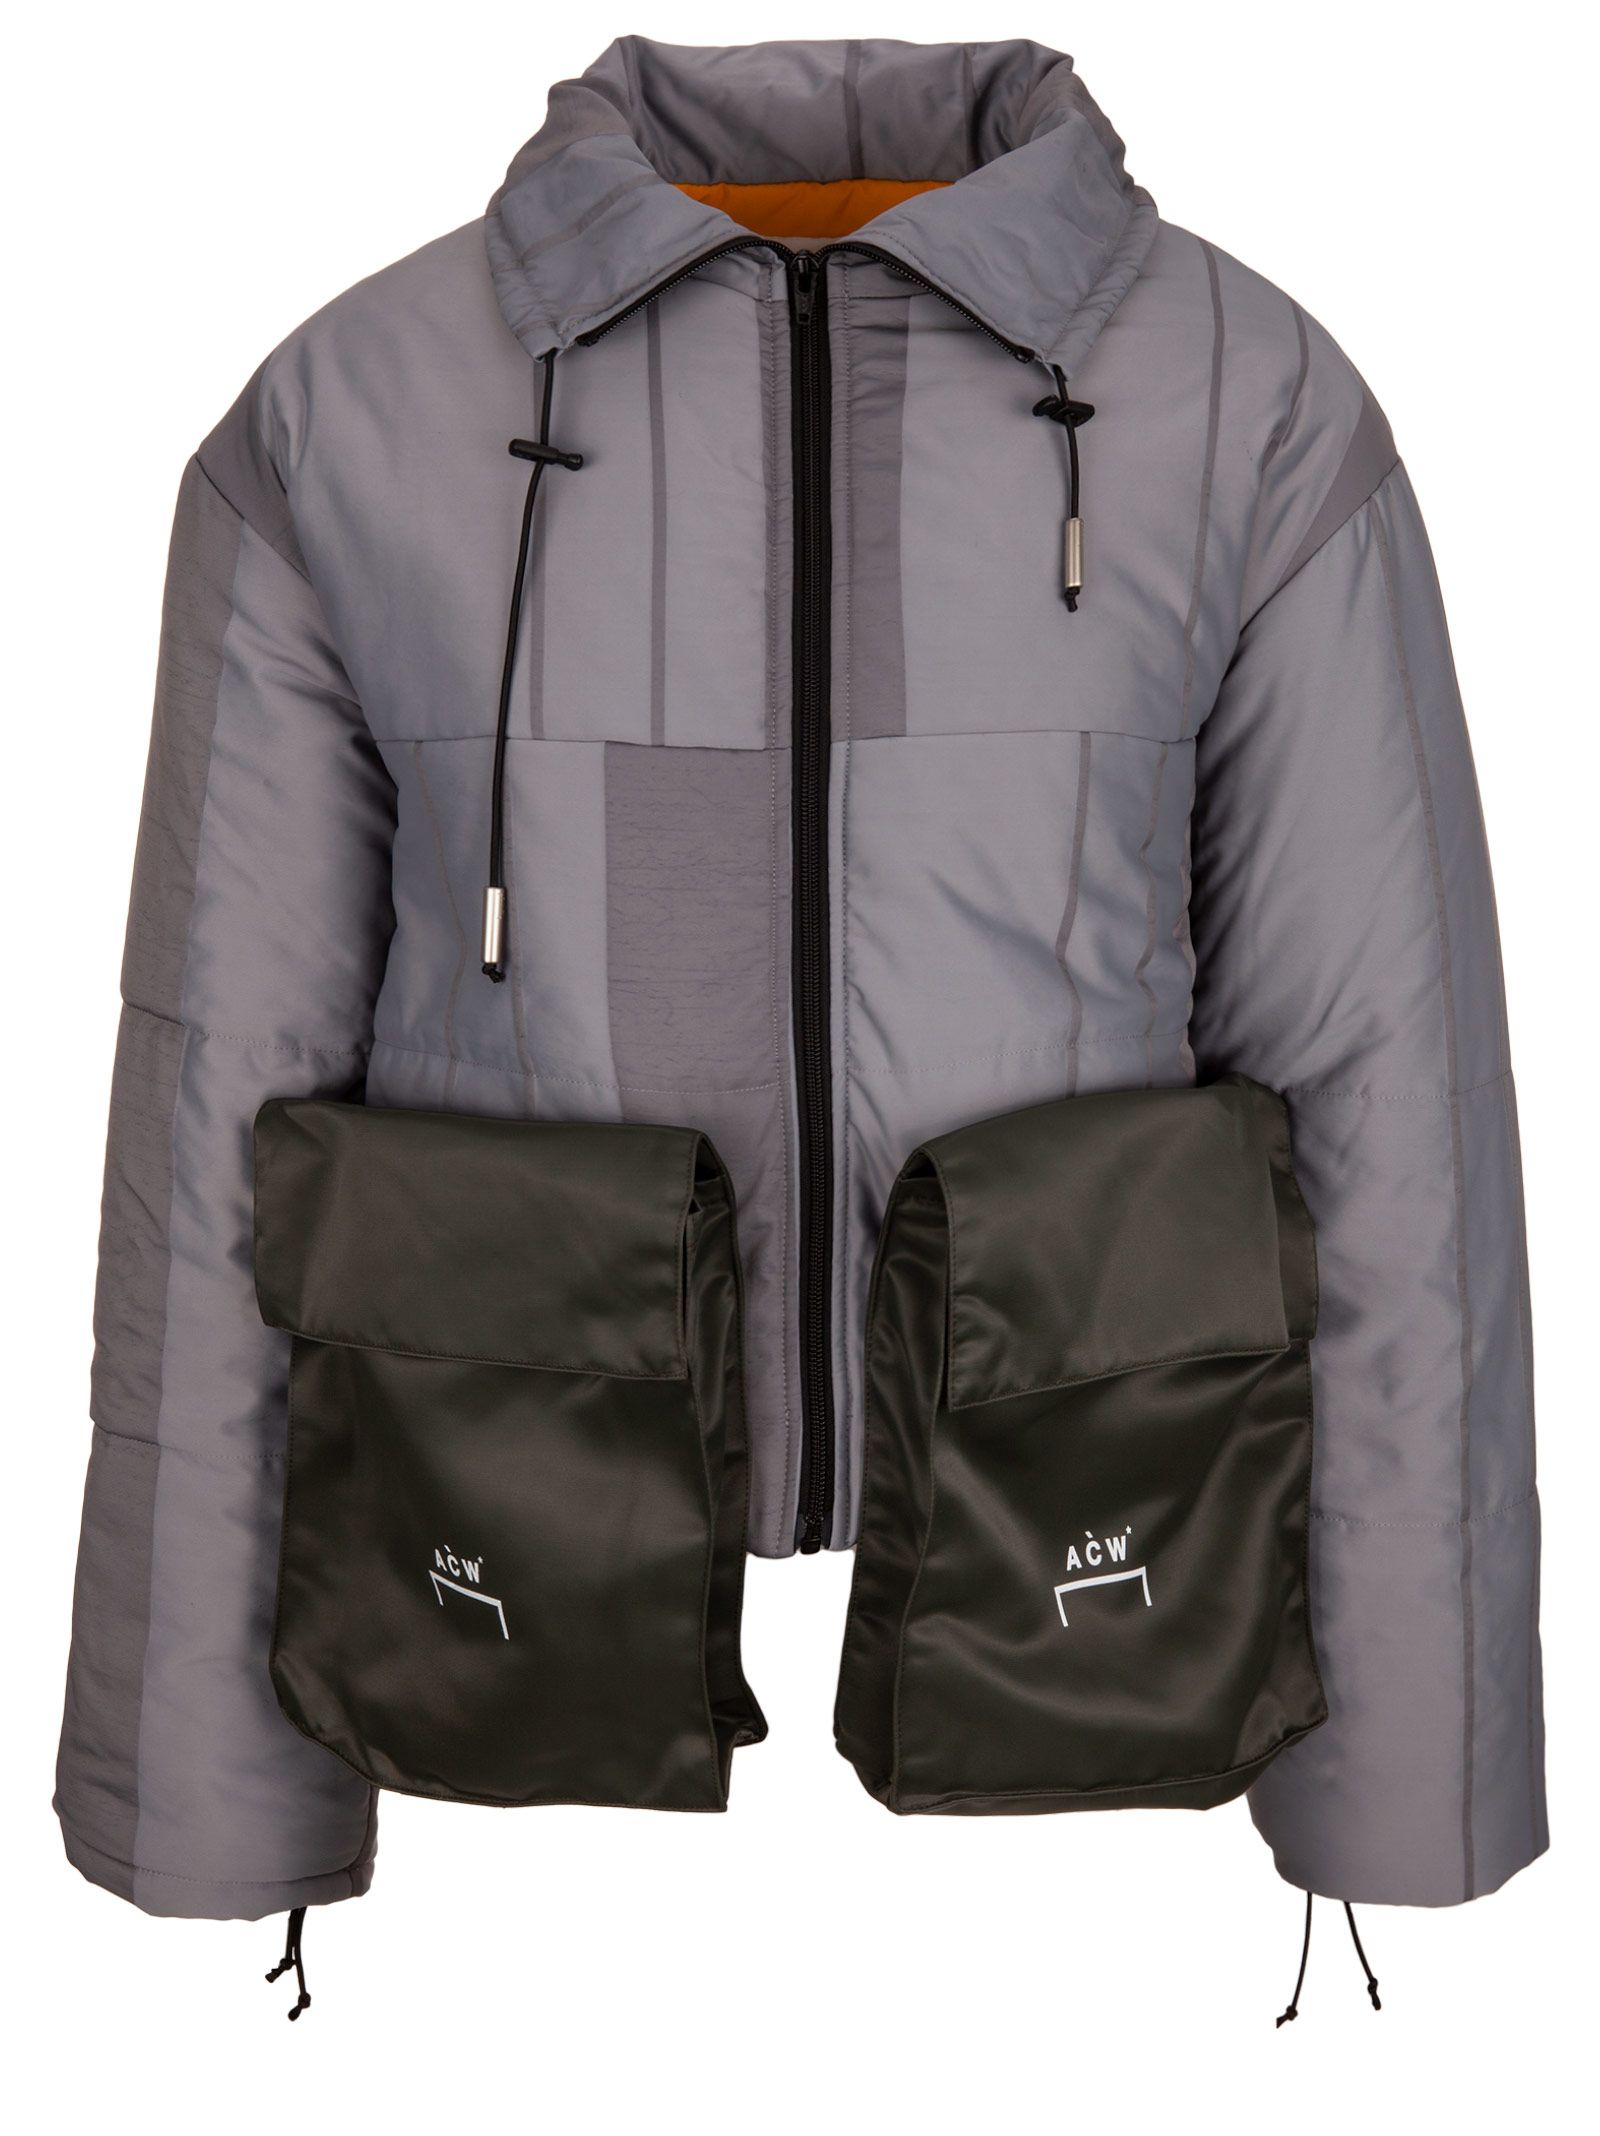 A-COLD-WALL A Cold Wall Down Jacket - Grey - 10780519 | italist